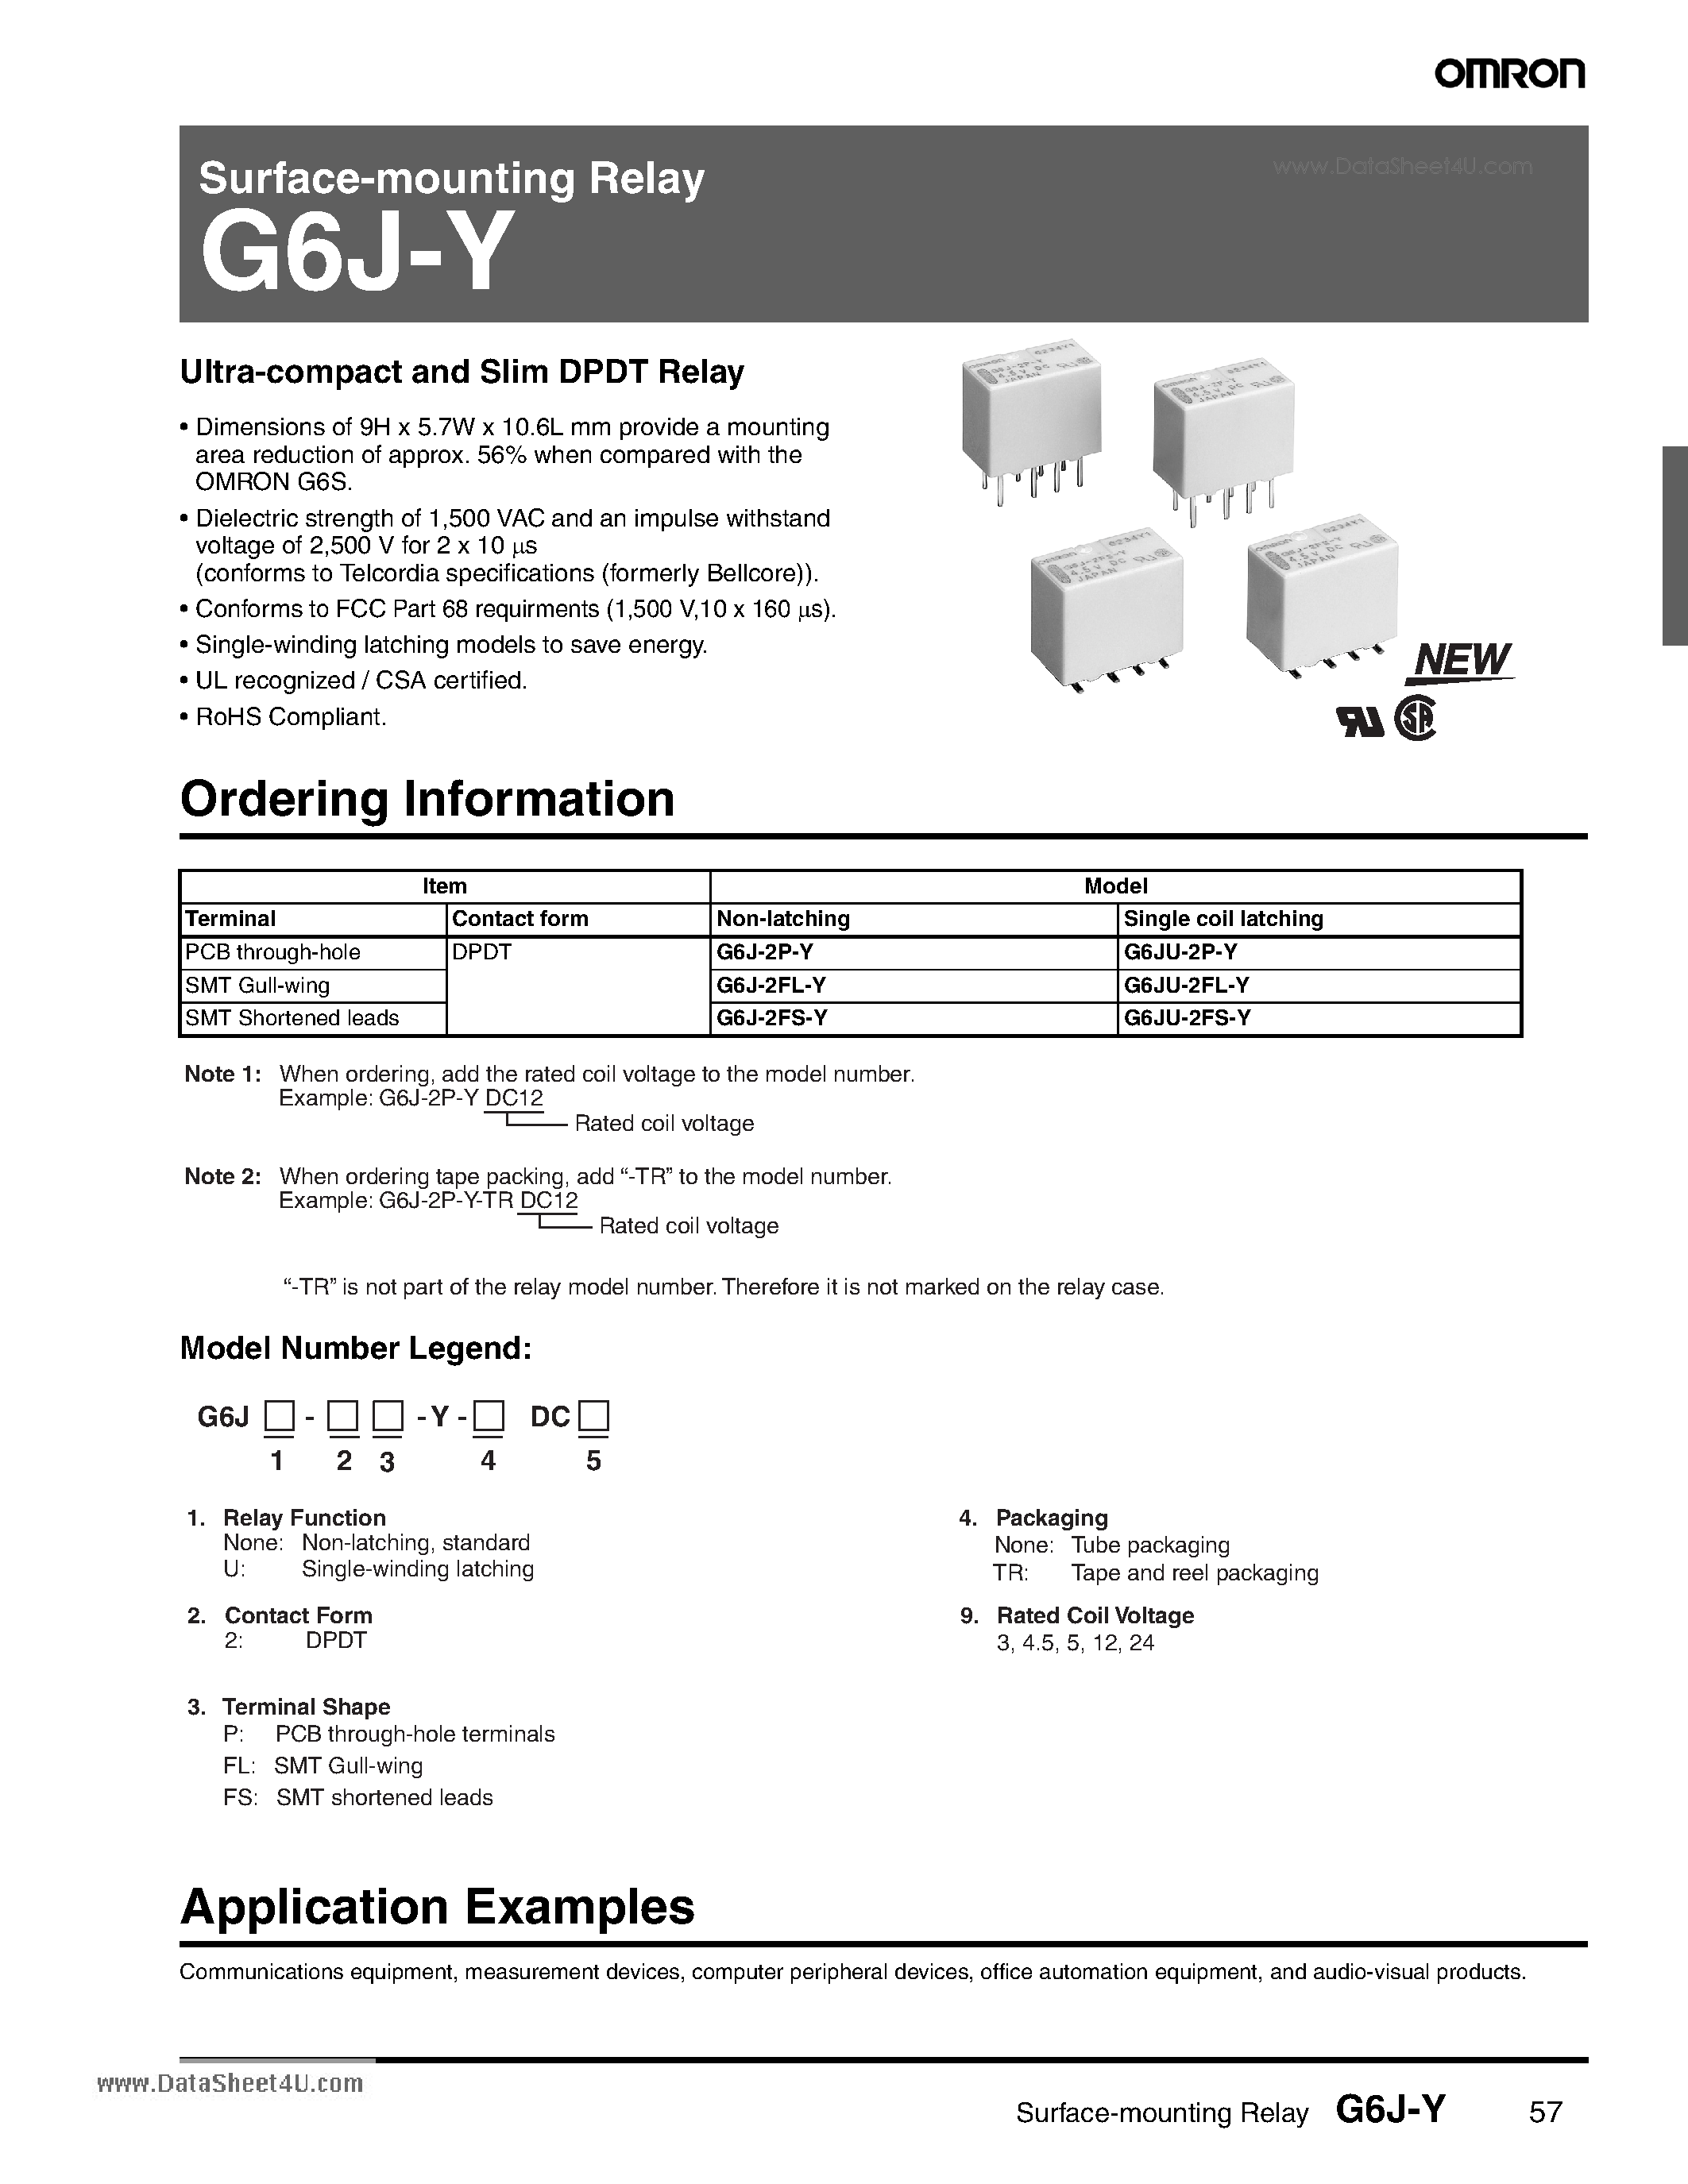 Datasheet G6J-Y - Surface-mounting Relay page 1